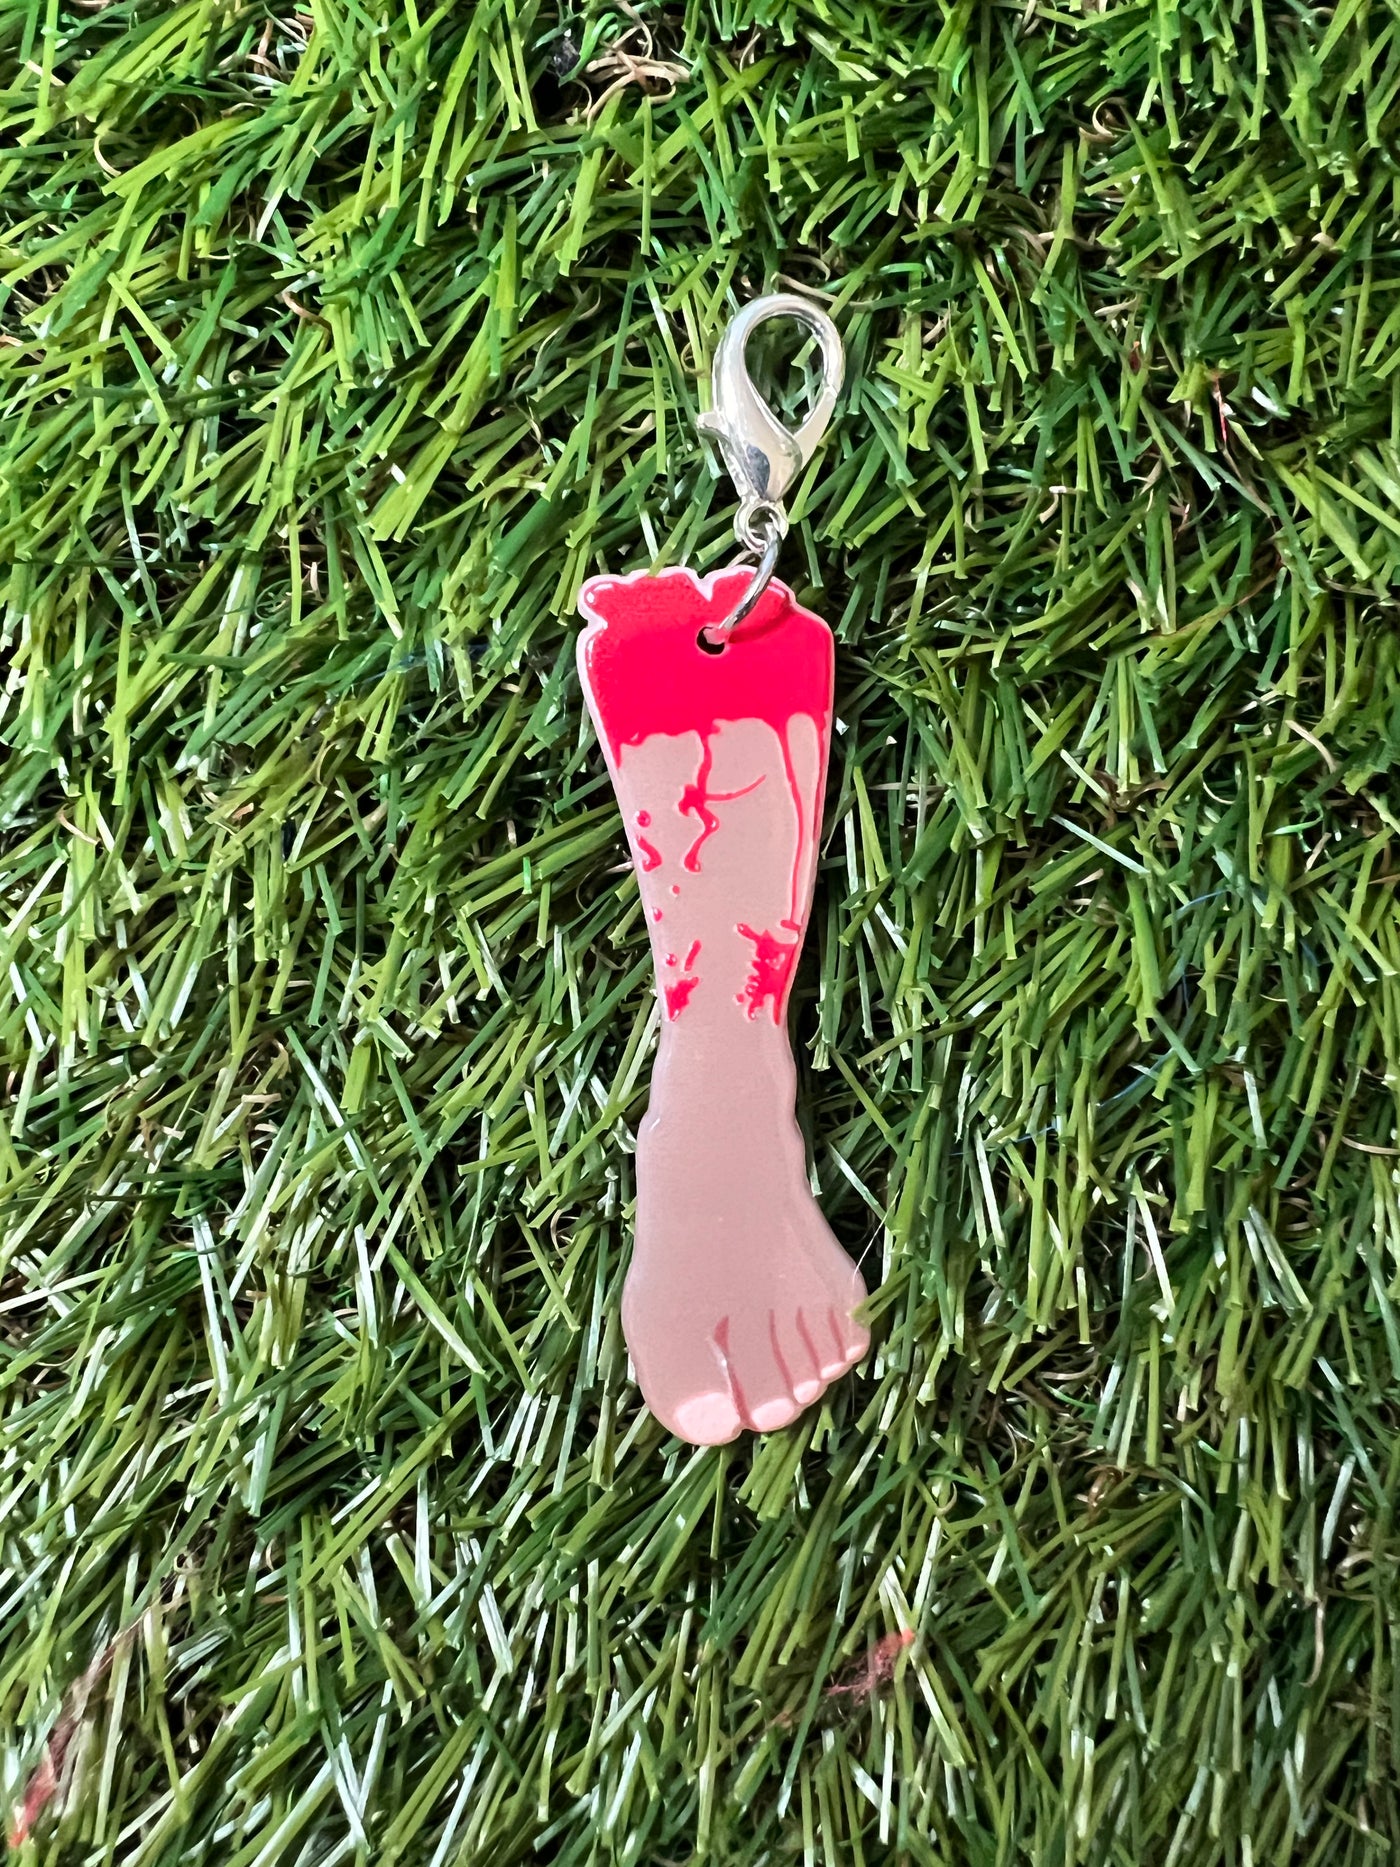 Bloody Limbs Hand and Foot Roller Skate Charm  - Shoe charm, Zipper pull, Bag charm - Choose Your Limb